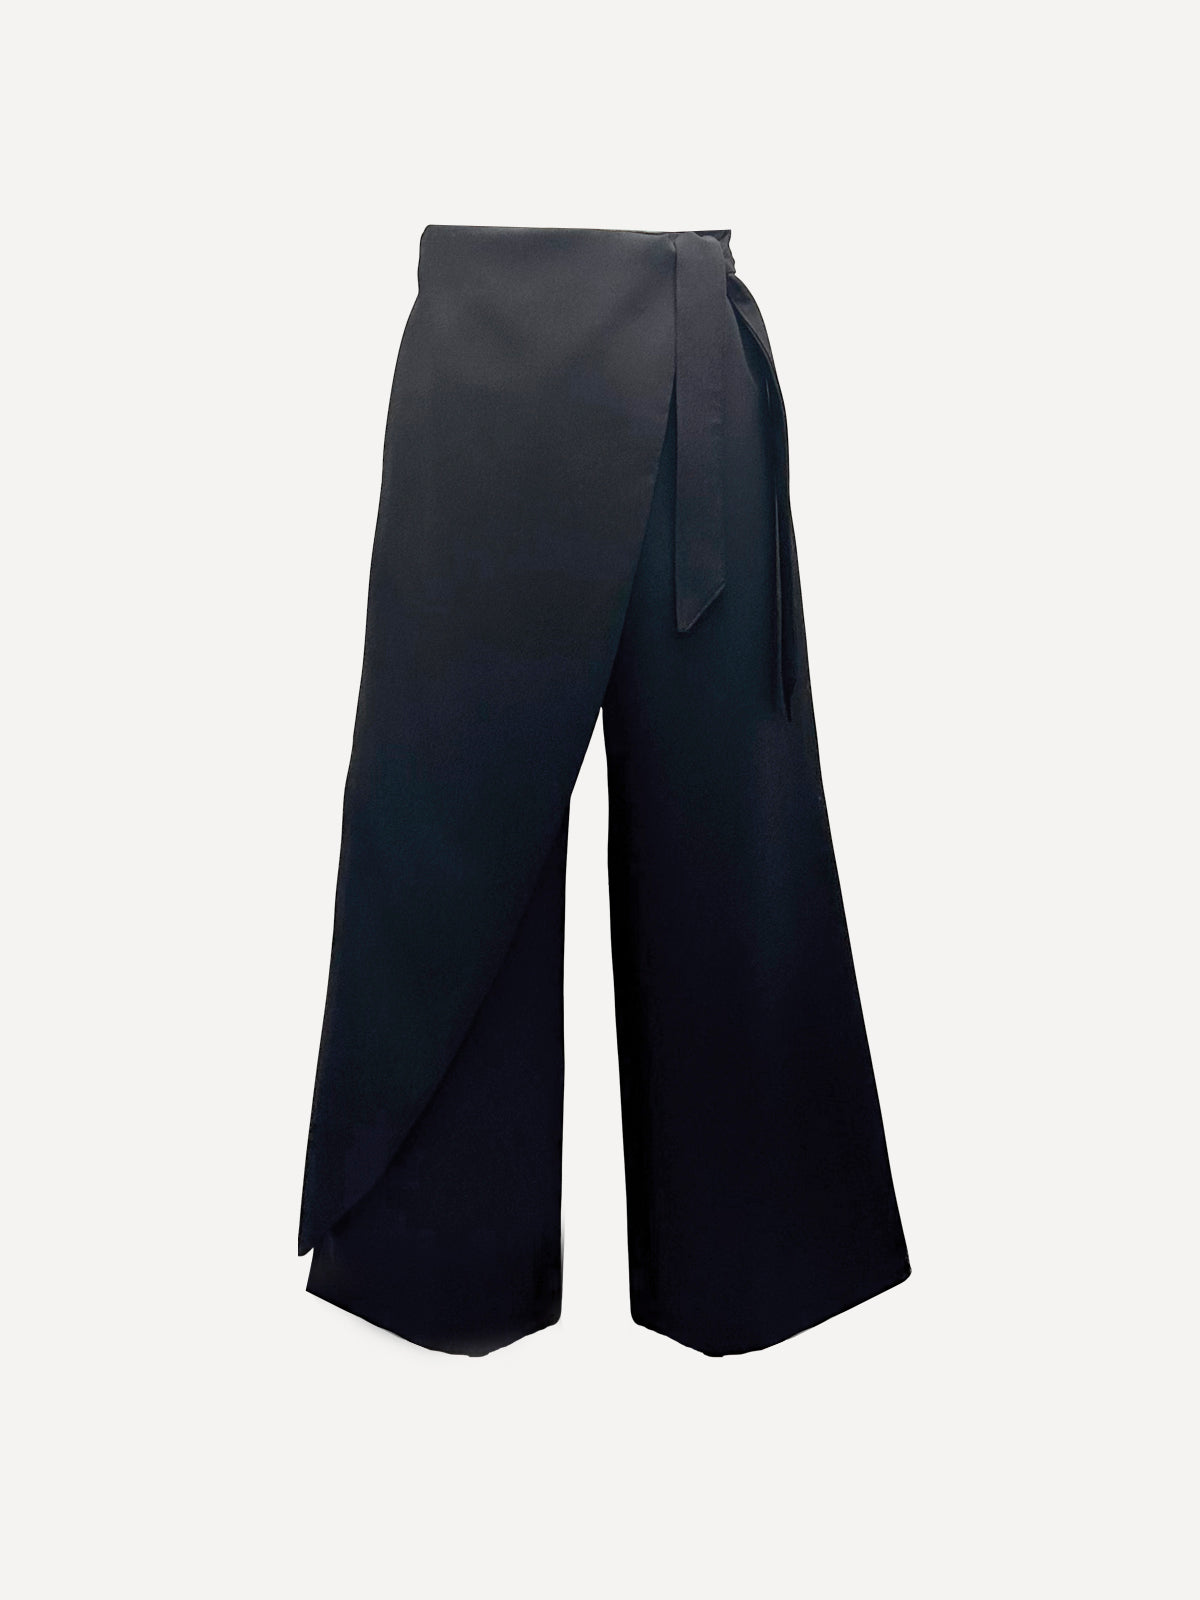 Black overlapping loose women's pants